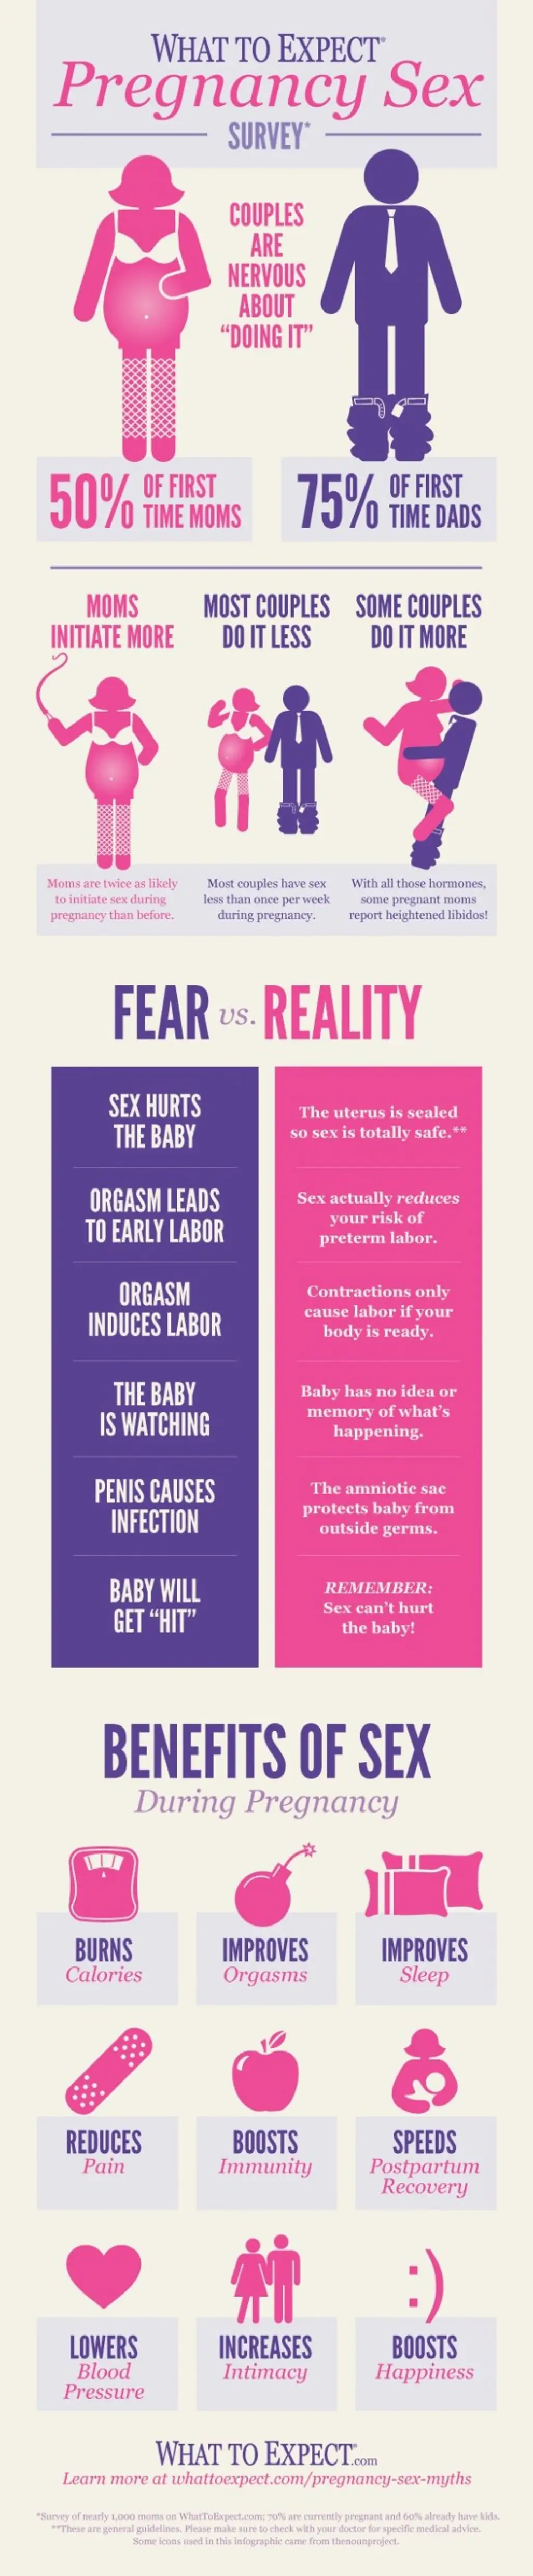 What to Expect during Pregnancy Sex